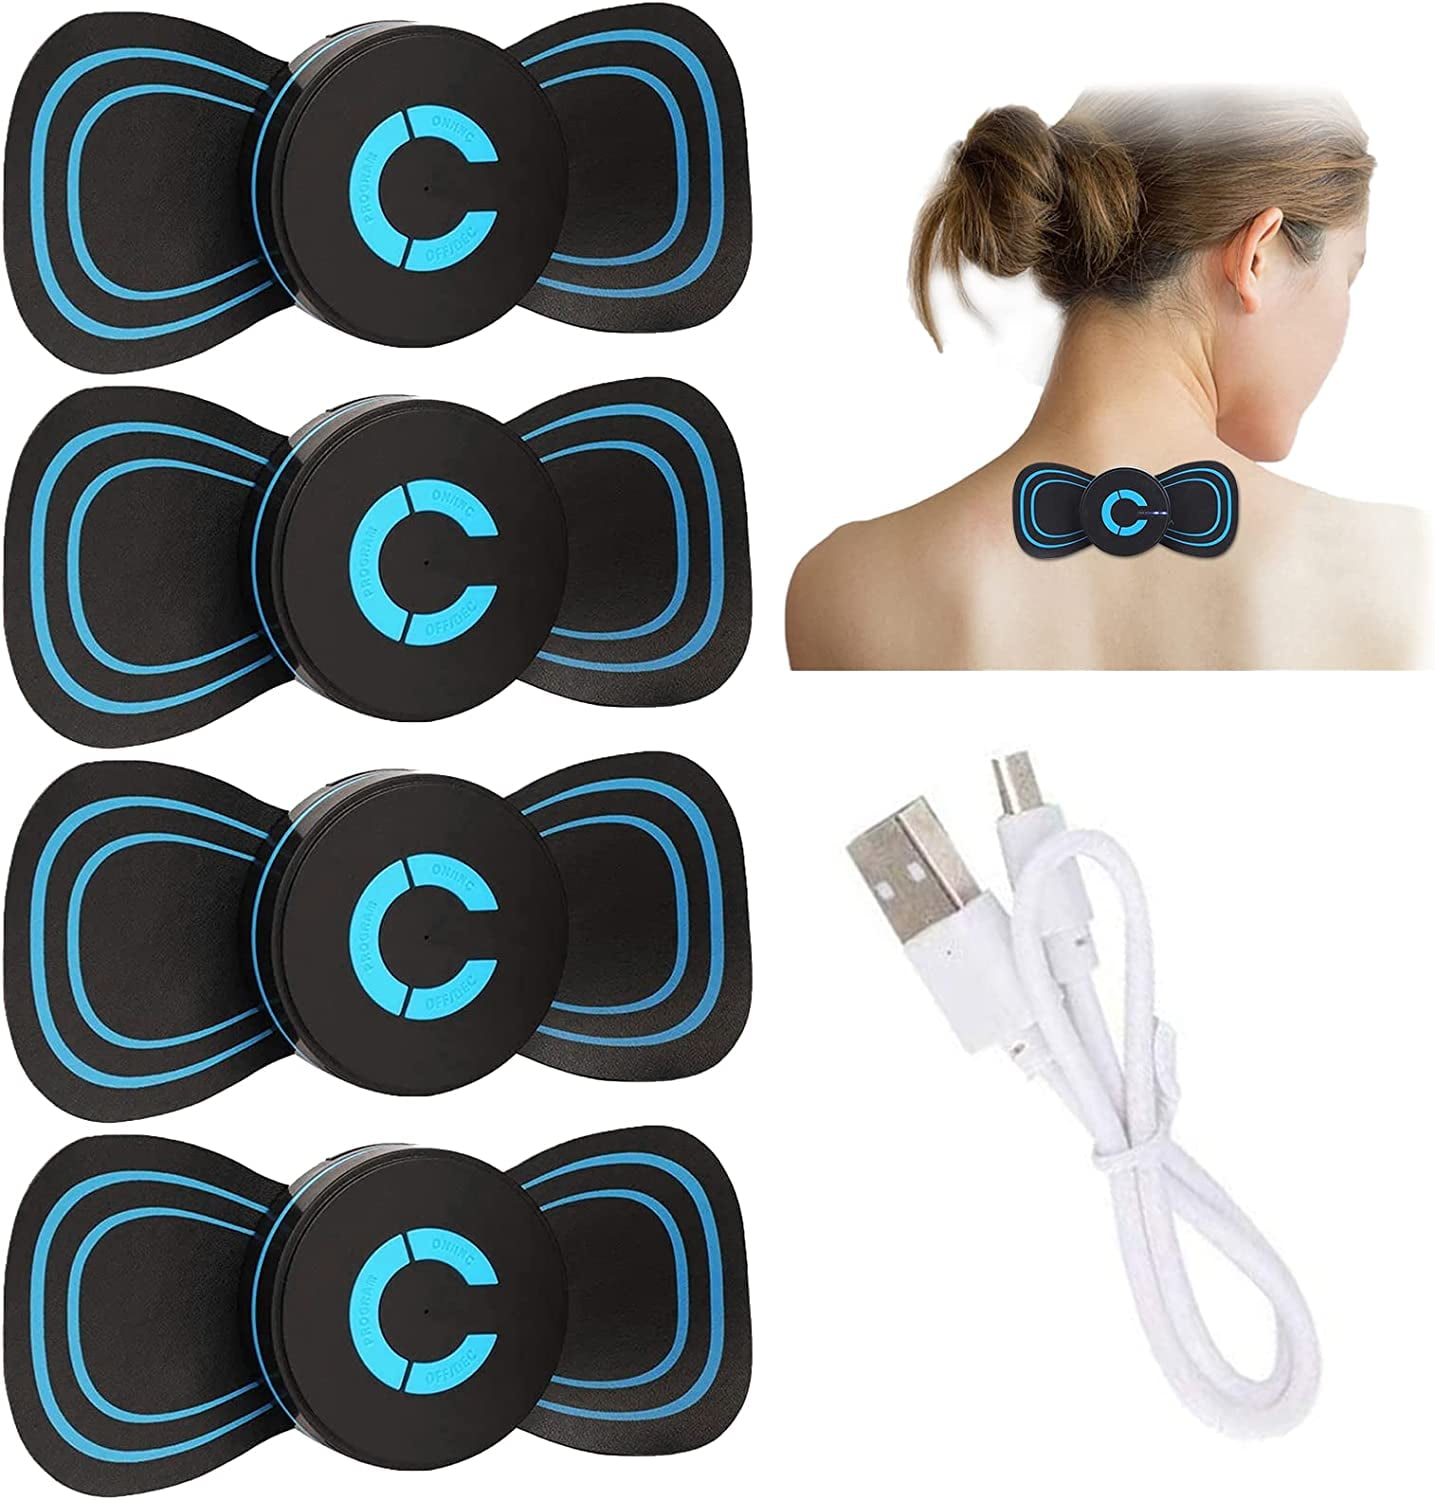 Neck Massaging Patch With Vibration And Heat Function, Full Body Chargeable  Portable Mini Ems Pulse Massager For Home And Travel Use